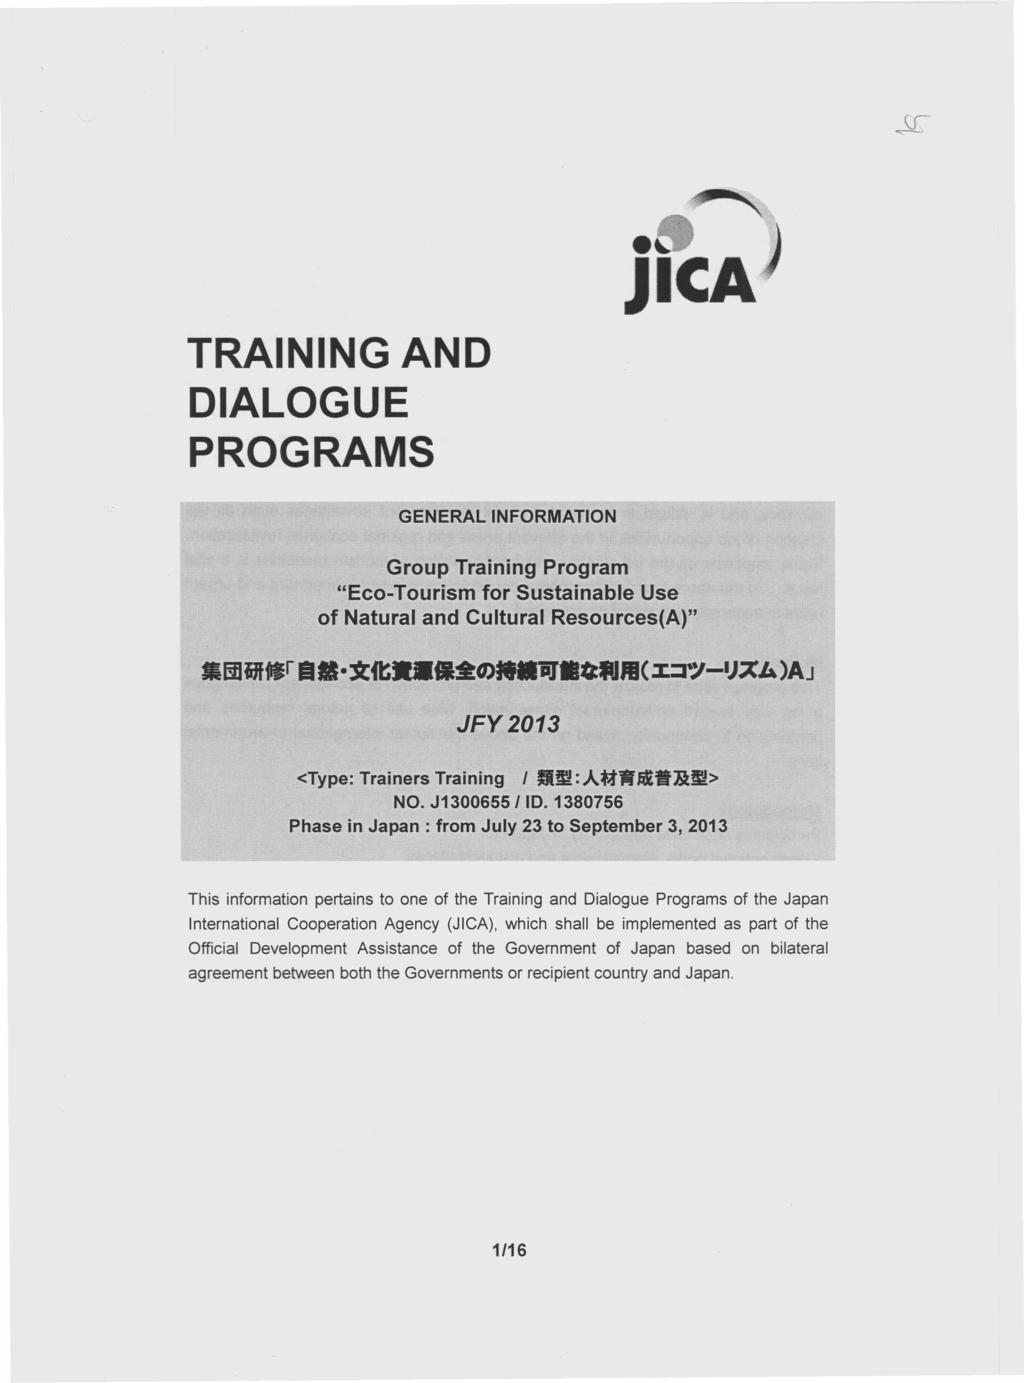 JICA TRAINING AND DIALOGUE PROGRAMS GENERAL INFORMATION Group Training Program "Eco-Tourism for Sustainable Use of Natural and Cultural Resources(A)" JFY2013 <Type: Trainers Training 1 BIll:AftJf